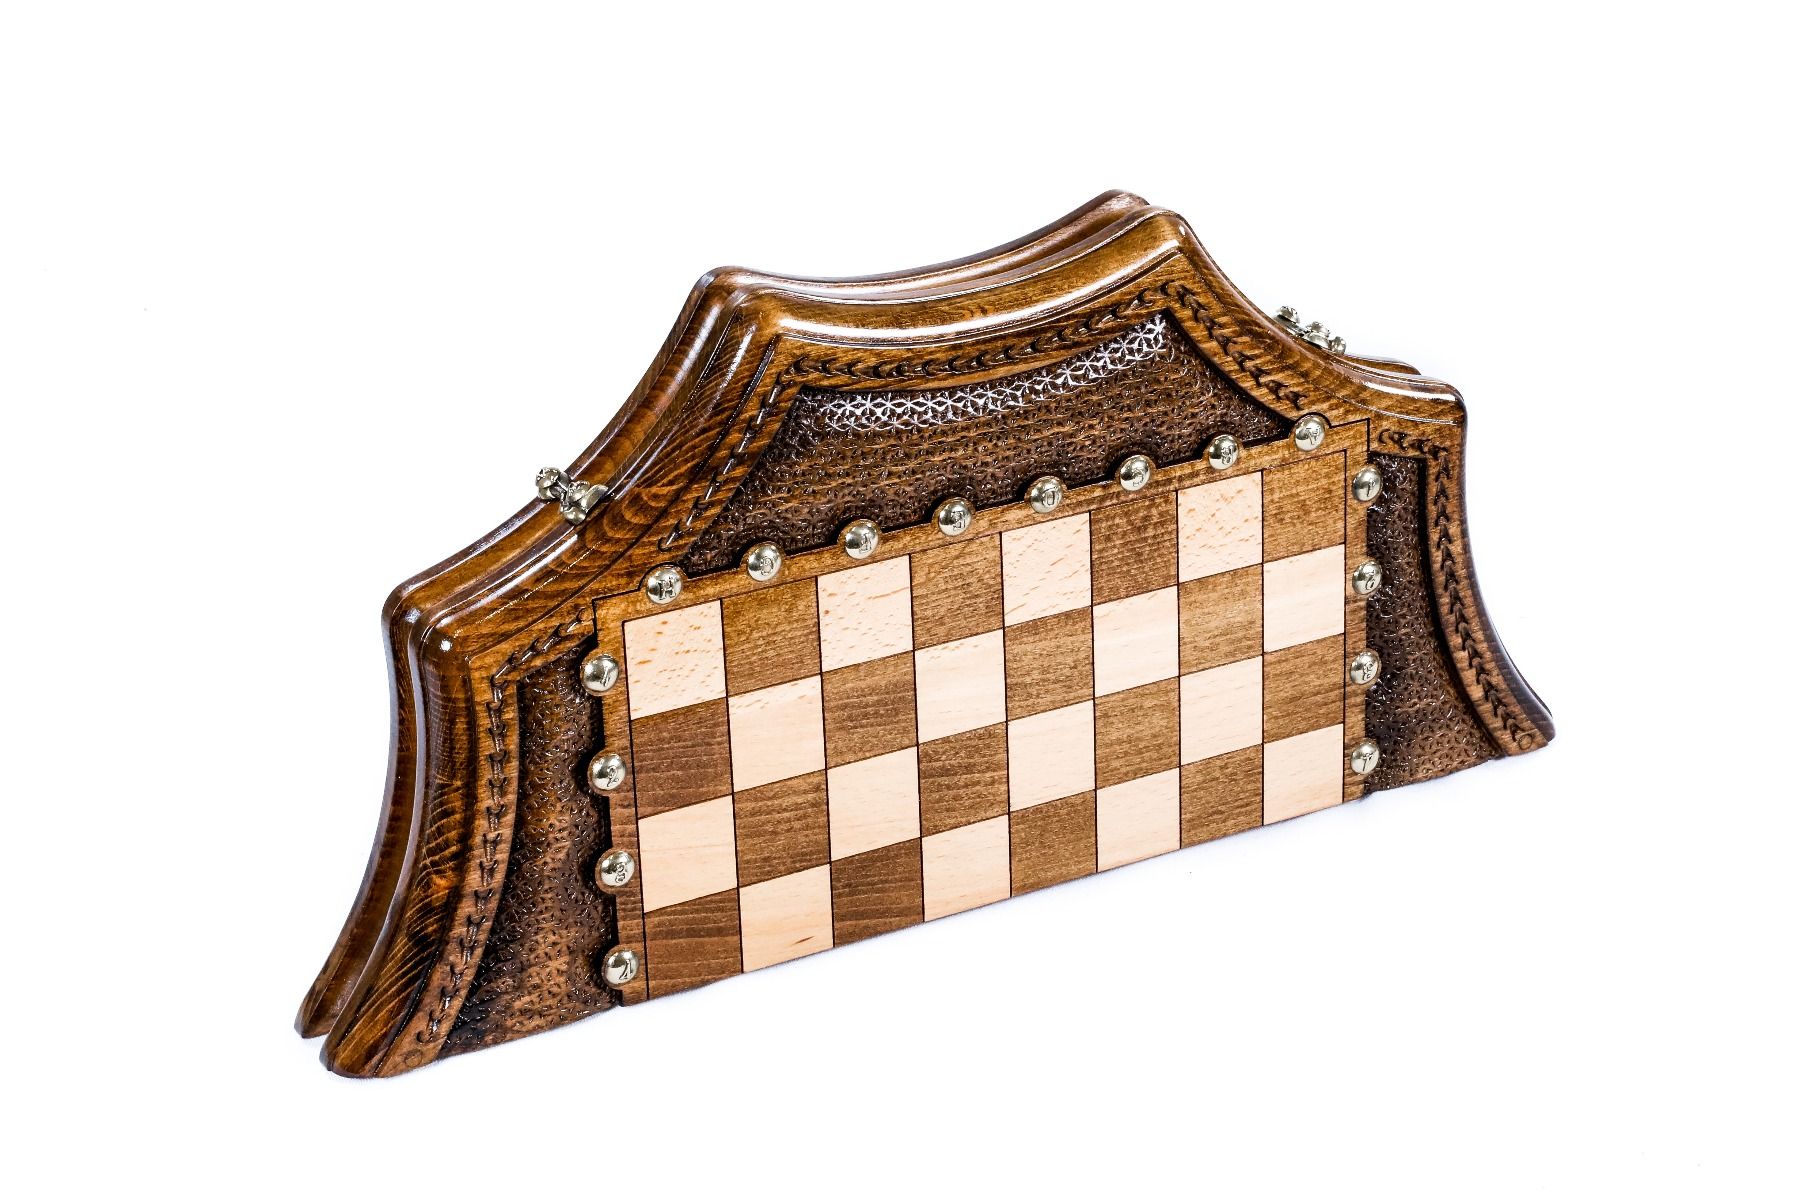 Engage in the timeless game of chess with a set that redefines elegance, featuring a star-shaped board and pieces enhanced with bronze details.